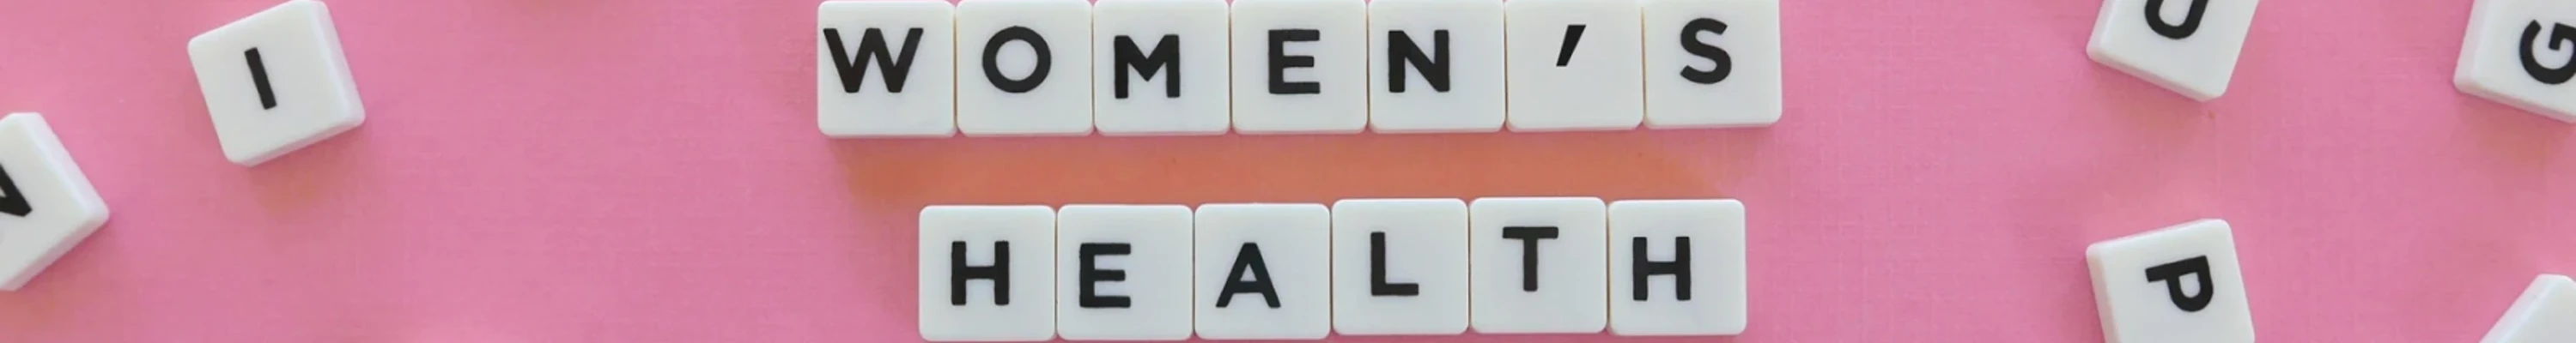 cubed letters used to spell out women's health